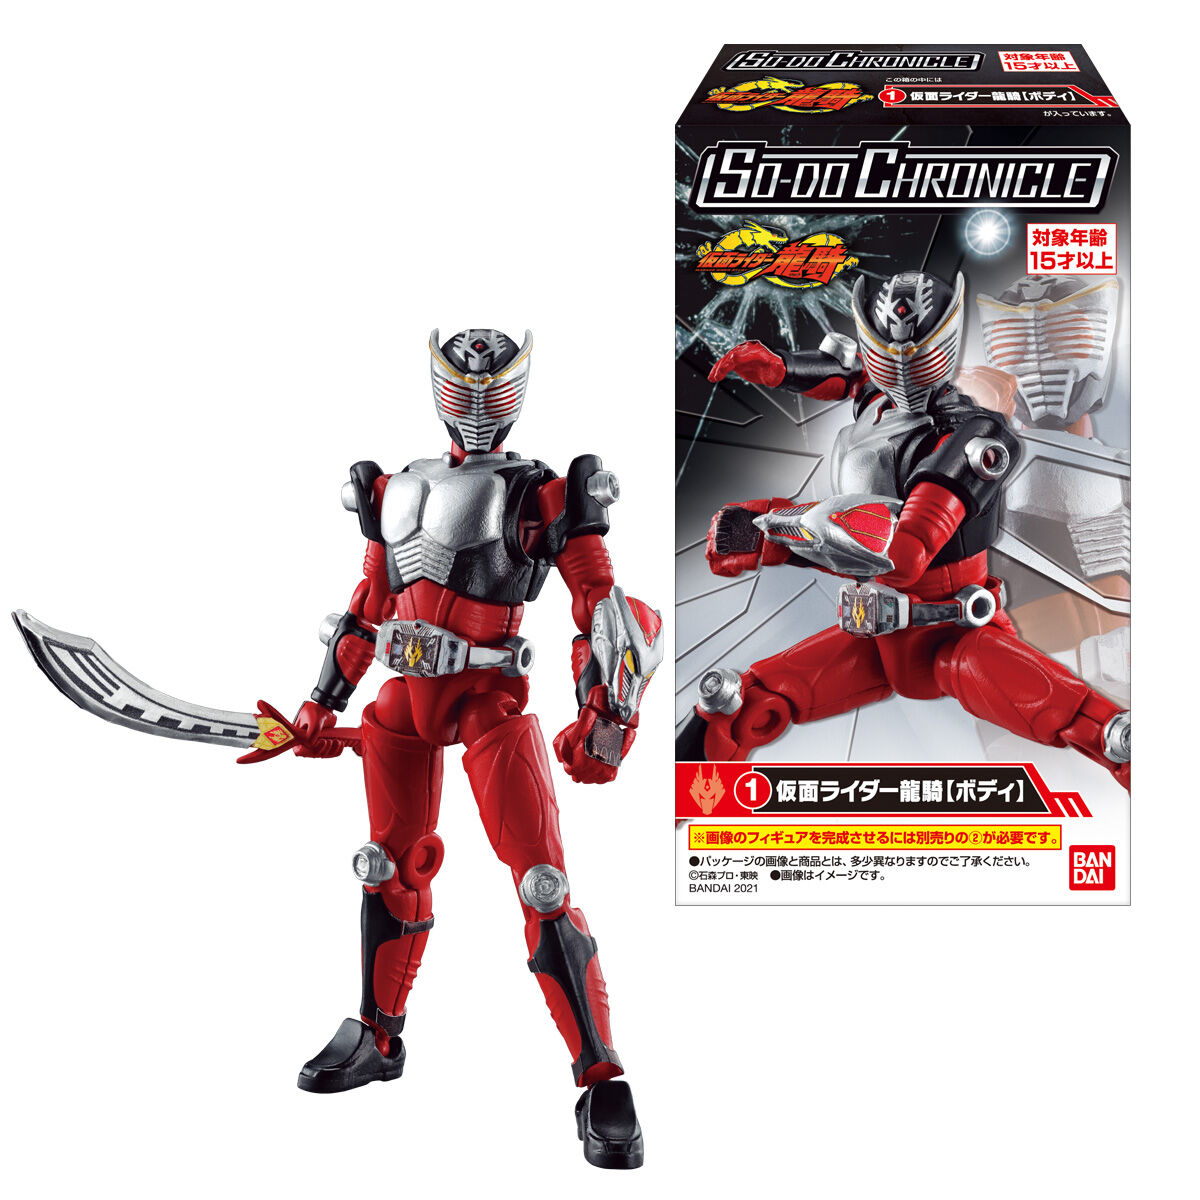 SO-DO CHRONICLE 仮面ライダー龍騎 ボルキャンサー&マグナギガセット ...